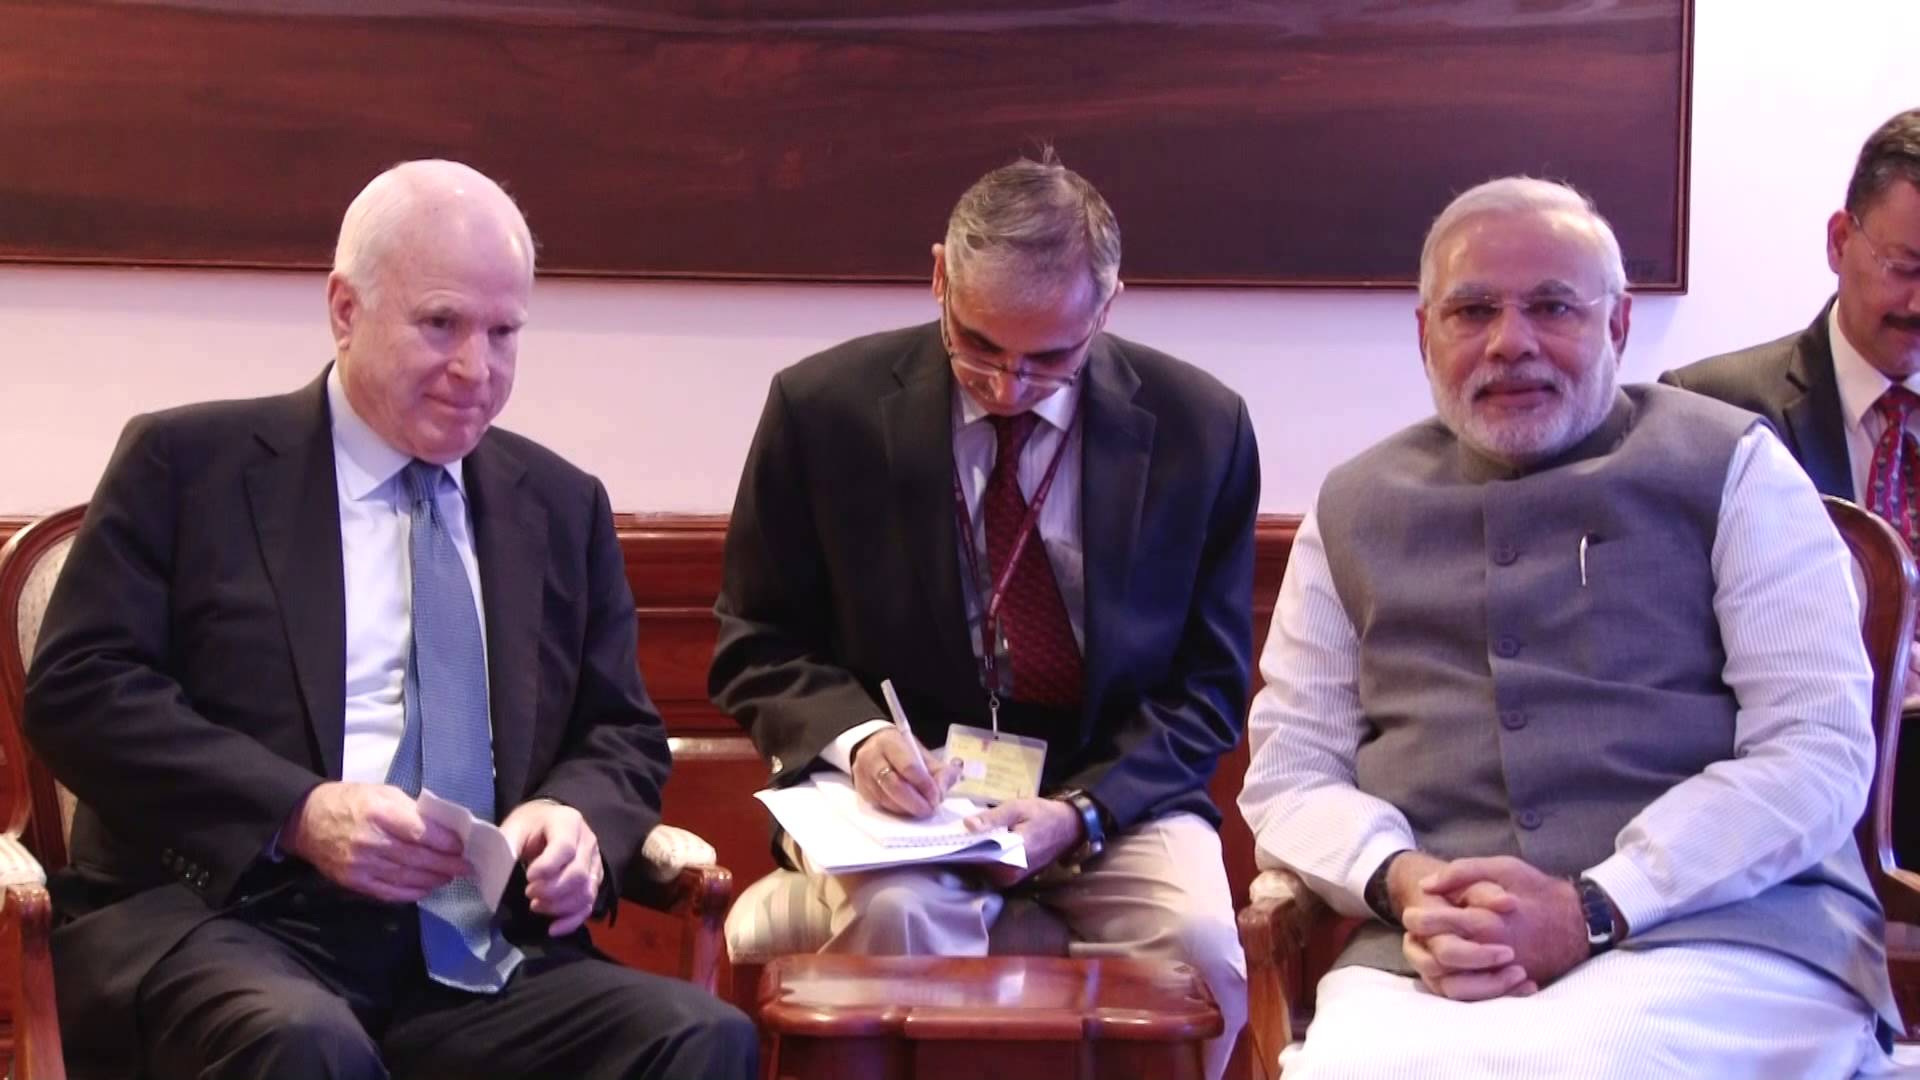 Key amendment by Sen. John McCain to recognize India as ‘global strategic & defense partner’ fails to muster majority support